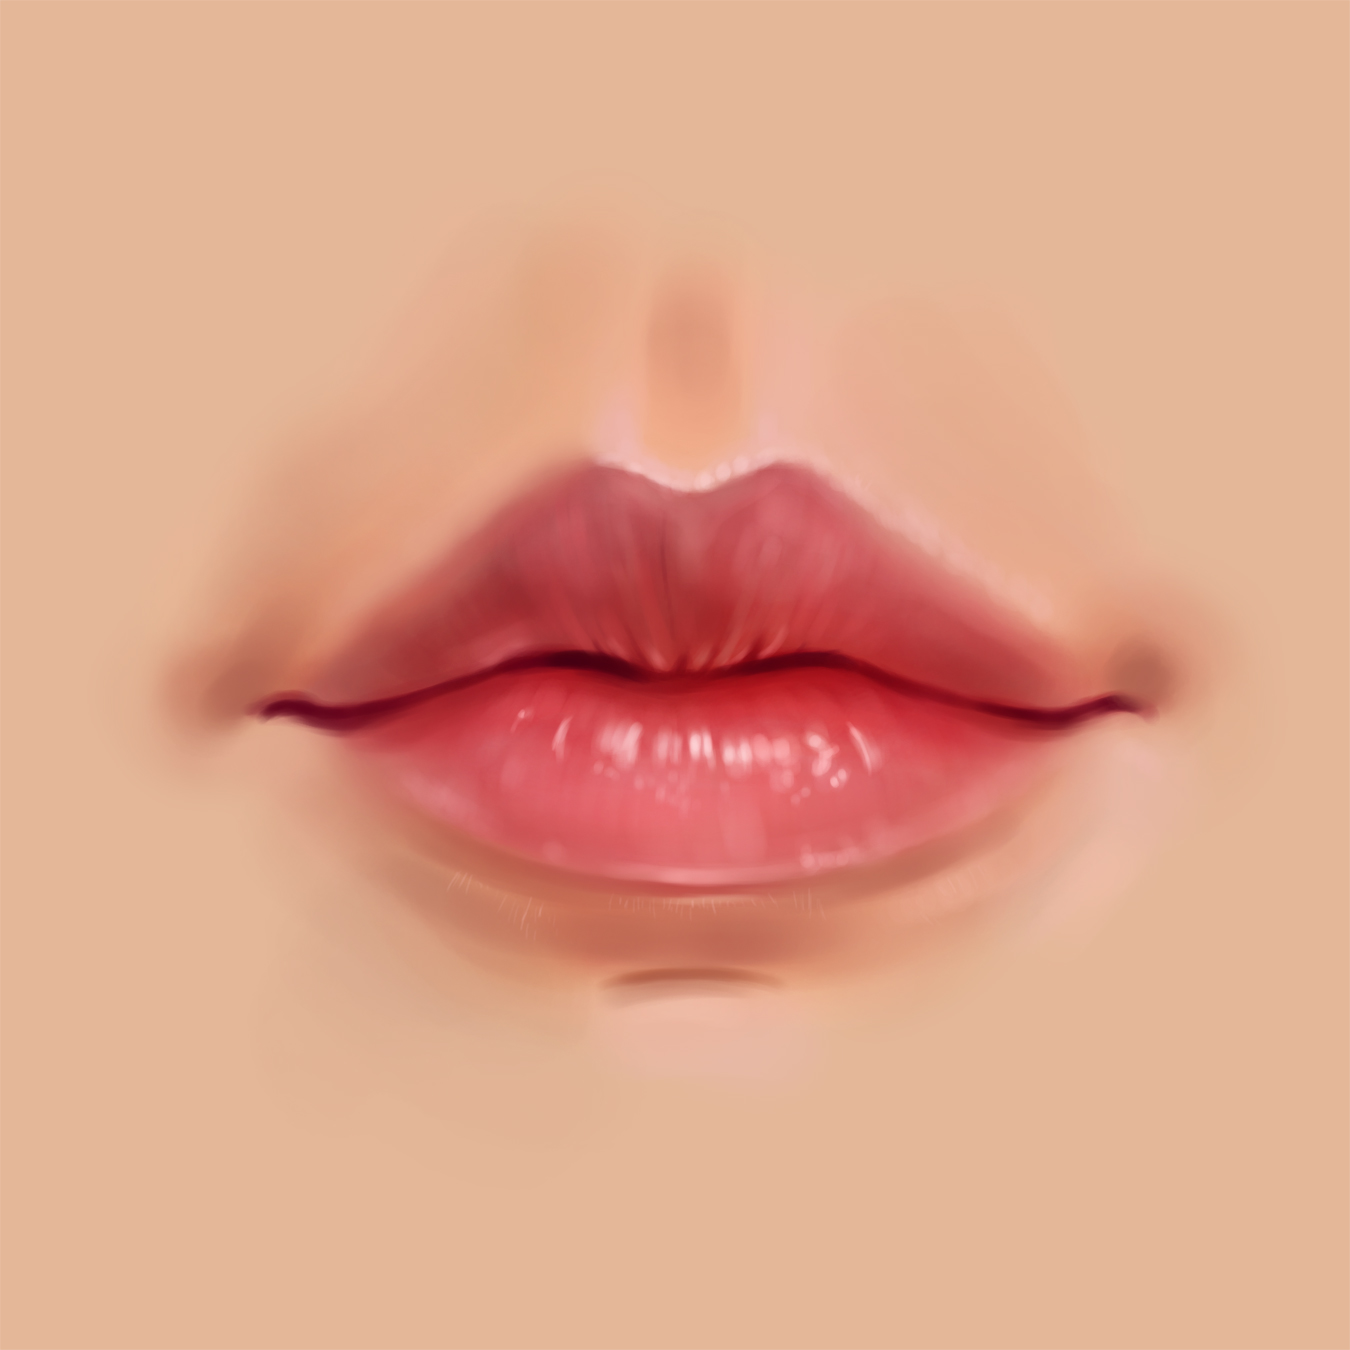 Mahto Art - Step by step lips drawing | Facebook